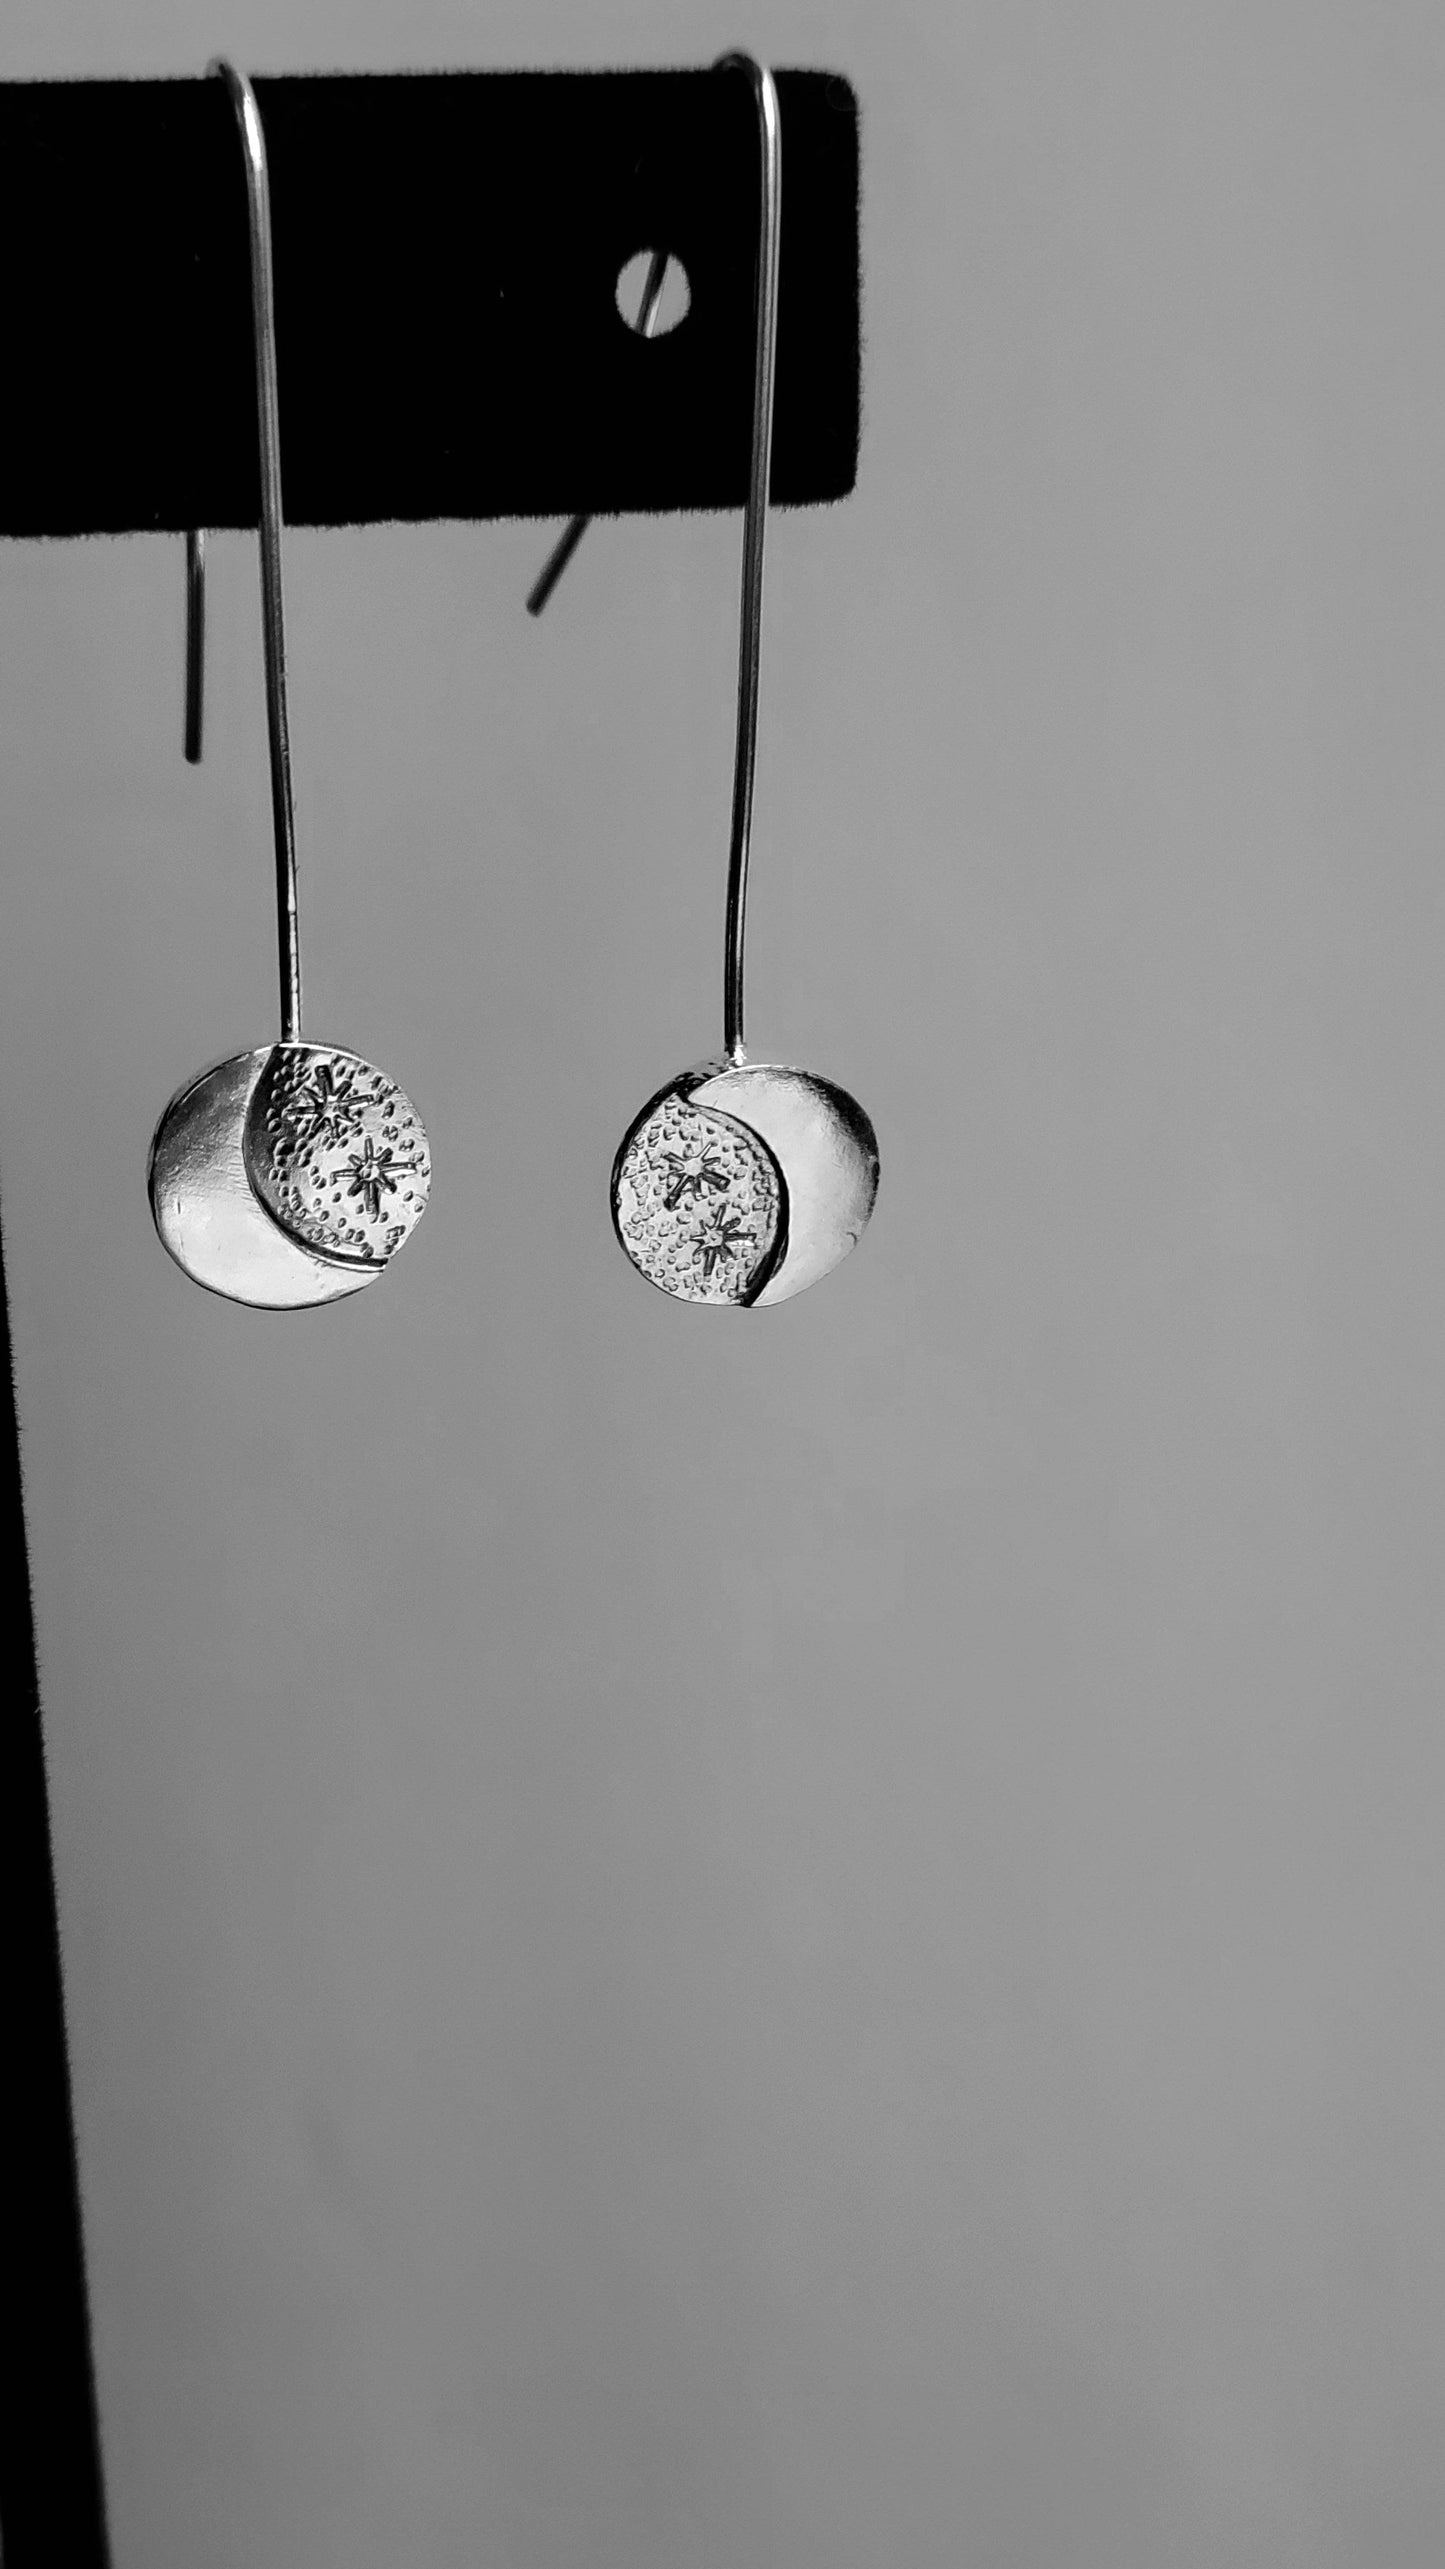 Stars and Moon Earrings in sterling silver